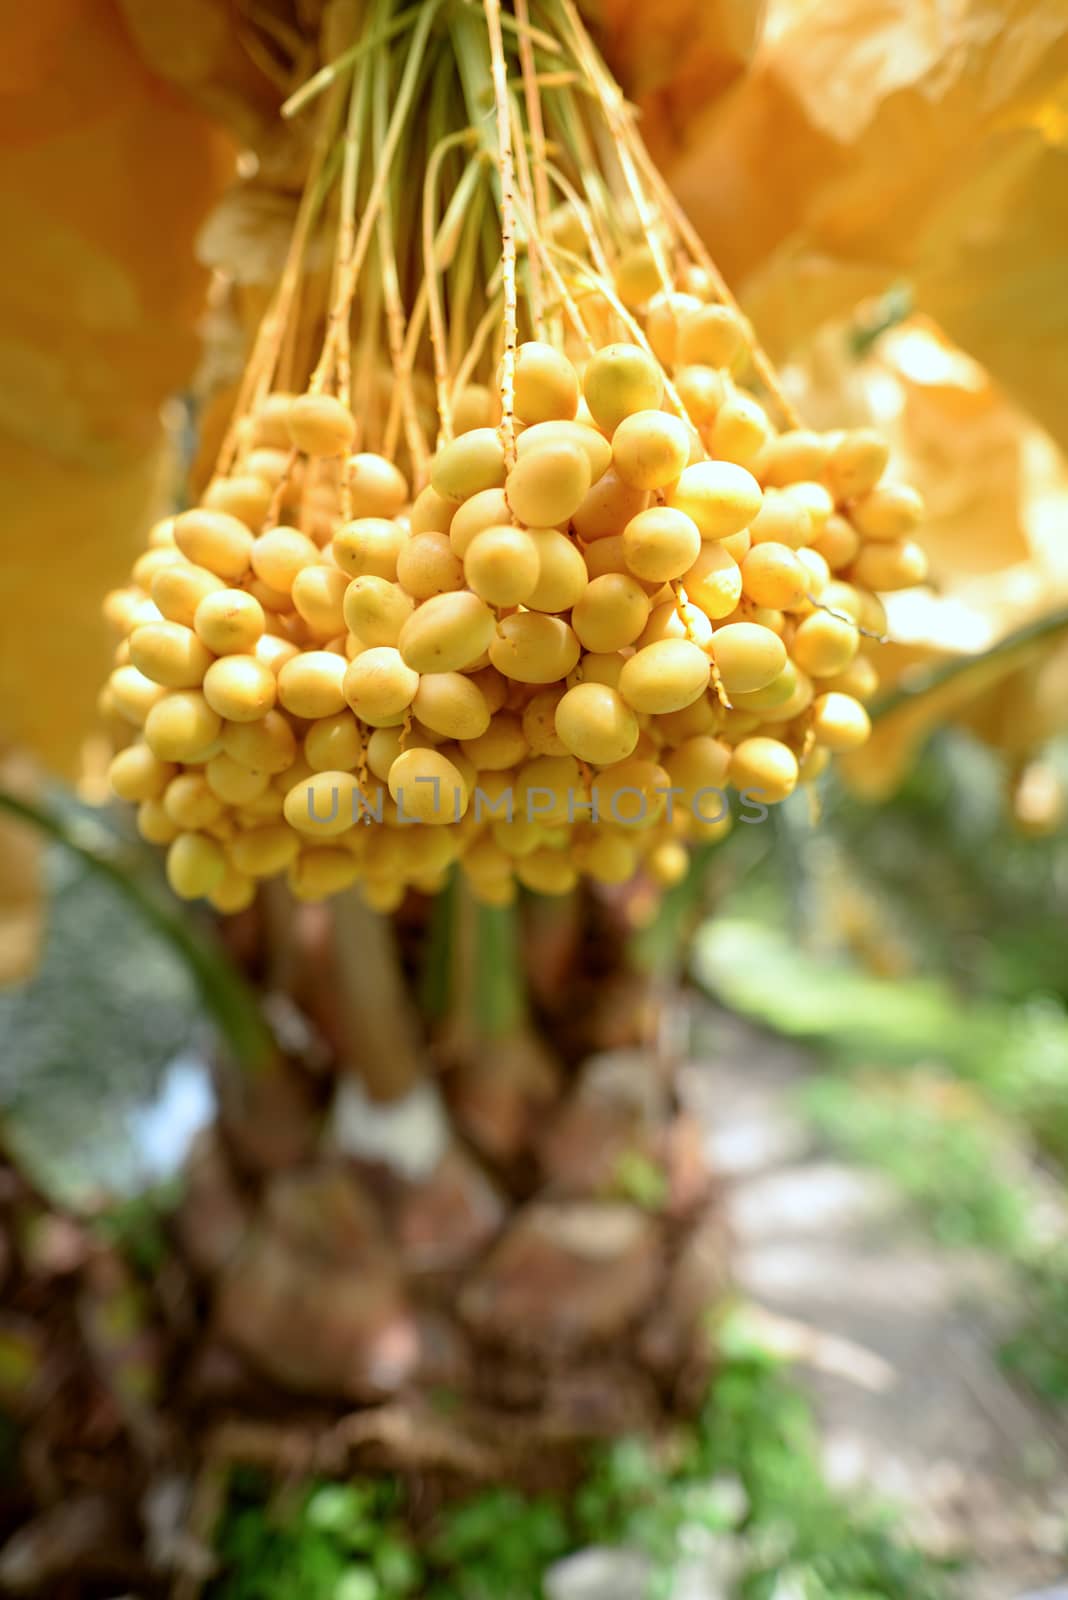 Date palm yellow fruit On a blurred background